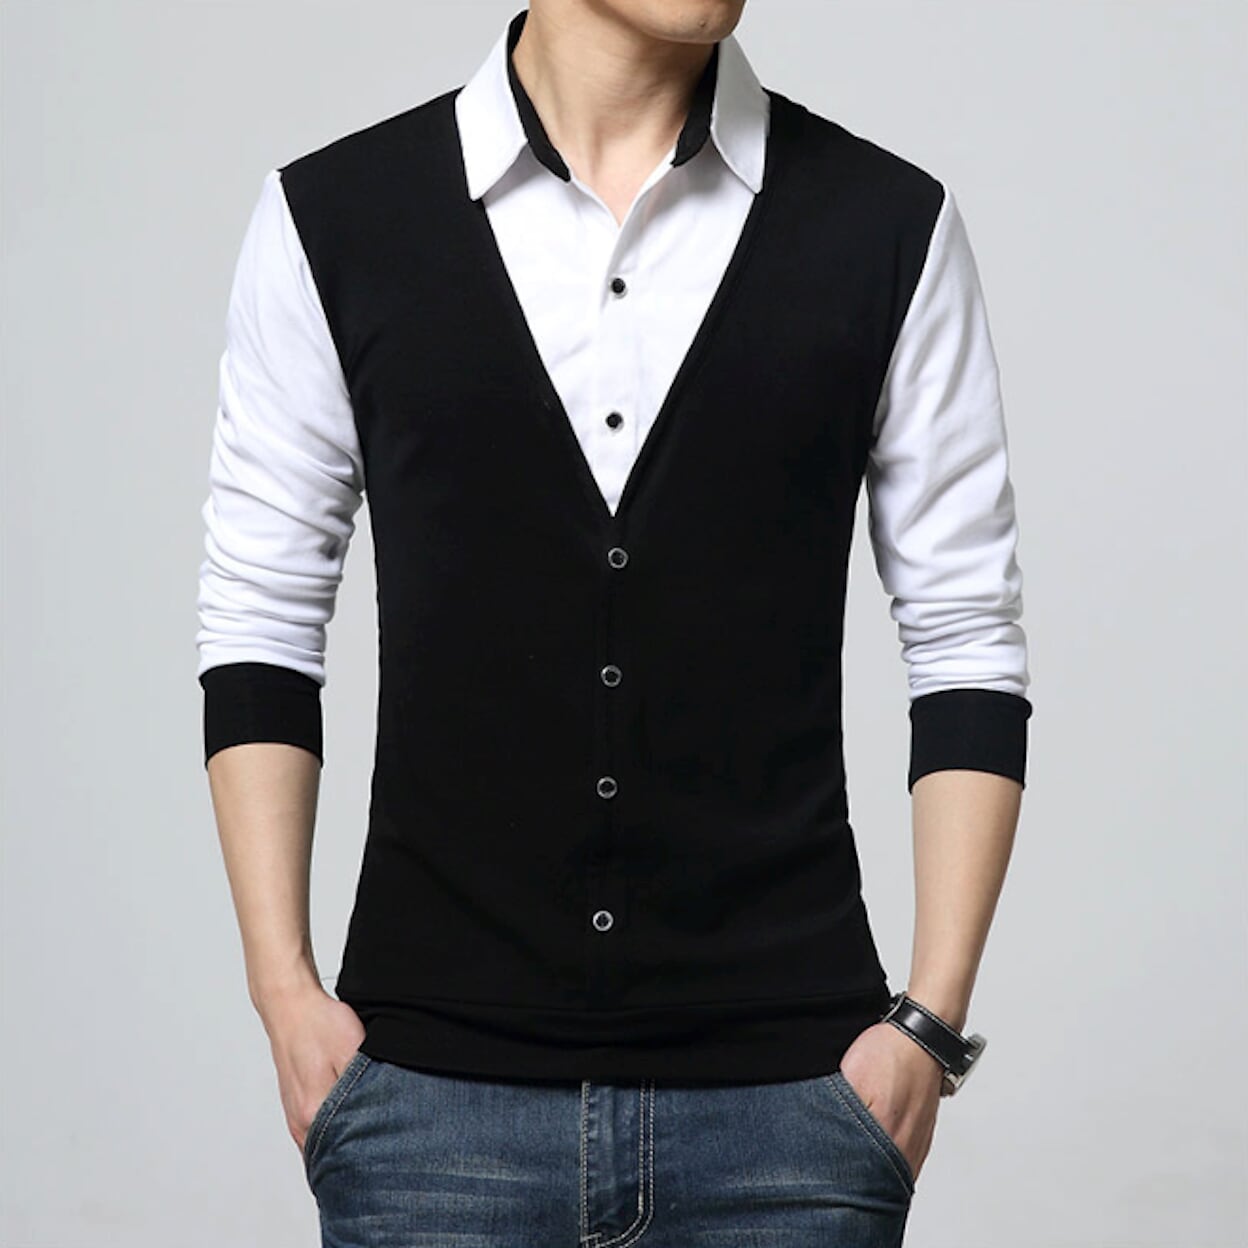 Mens Layered Look Shirt with Vest